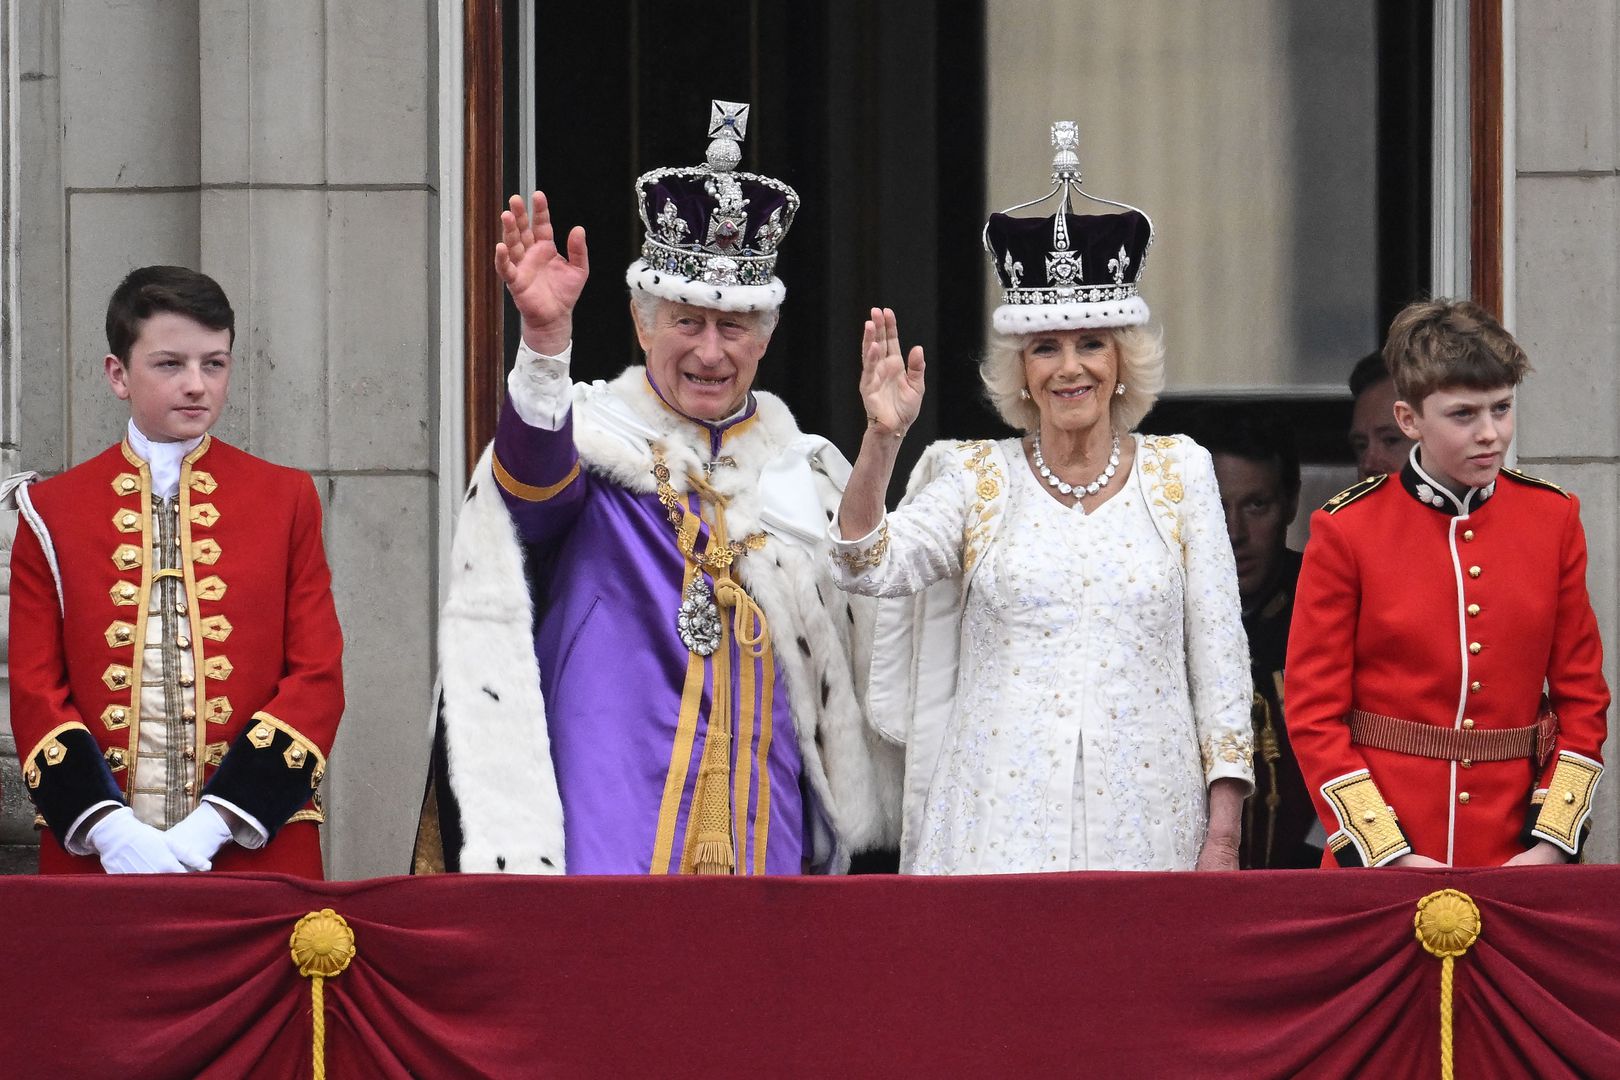 Britain's King Charles III wearing the Imperial state Crown, and Britain's Queen Camilla wearing a modified version of Queen Mary's Crown wave from the Buckingham Palace balcony after viewing the Royal Air Force fly-past in central London on May 6, 2023, after their coronations. - The set-piece coronation is the first in Britain in 70 years, and only the second in history to be televised. Charles will be the 40th reigning monarch to be crowned at the central London church since King William I in 1066. (Photo by Marco BERTORELLO / AFP)